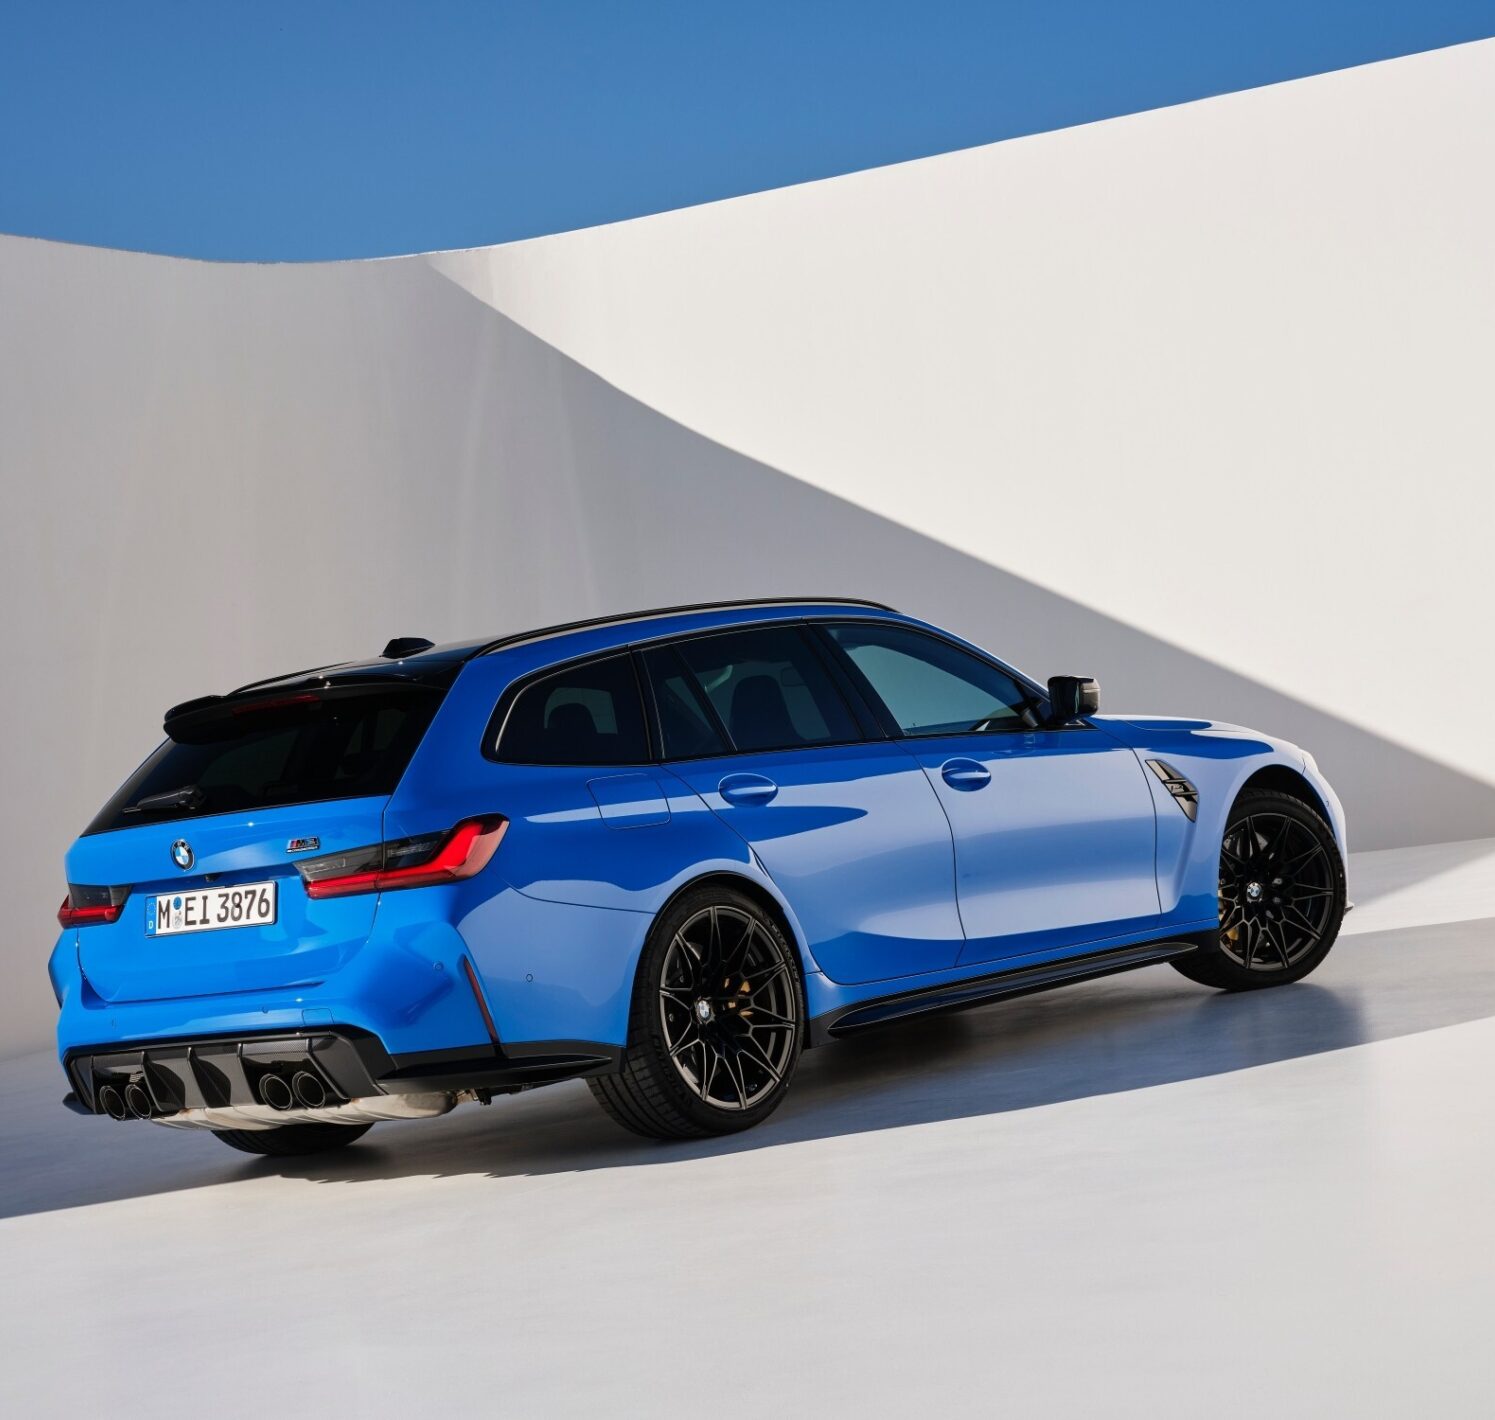 https://autofilter.sk/assets/images/m3-touring/gallery/P90551049_lowRes_the-new-bmw-m3-touri.jpg - obrazok